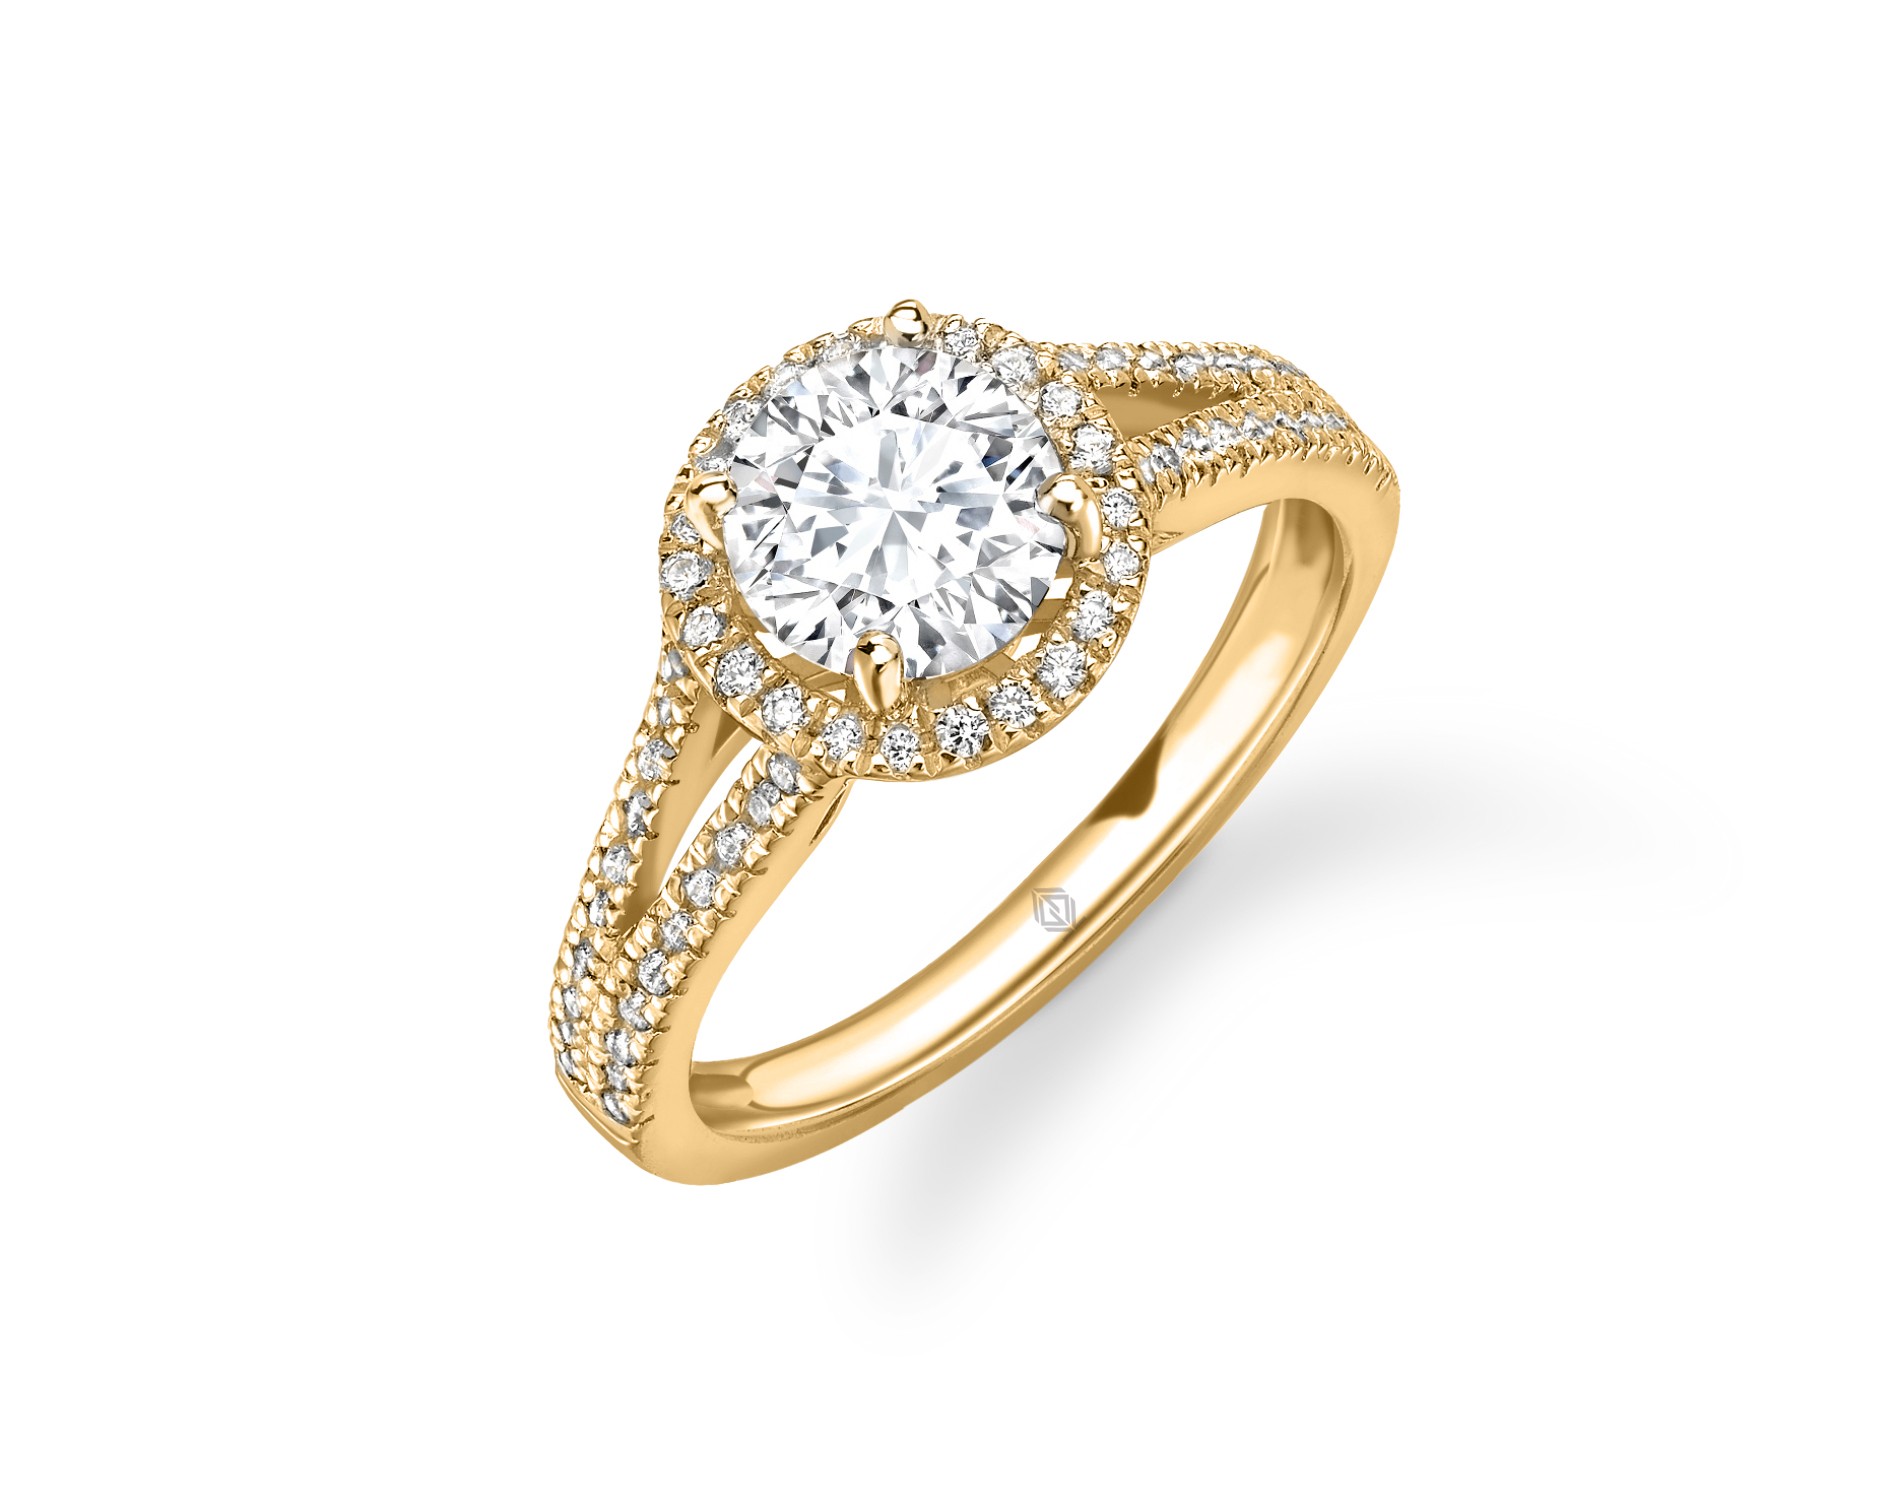 18K YELLOW GOLD HALO DIAMOND ENGAGEMENT RING WITH SPLIT SHANKS IN PAVE SET